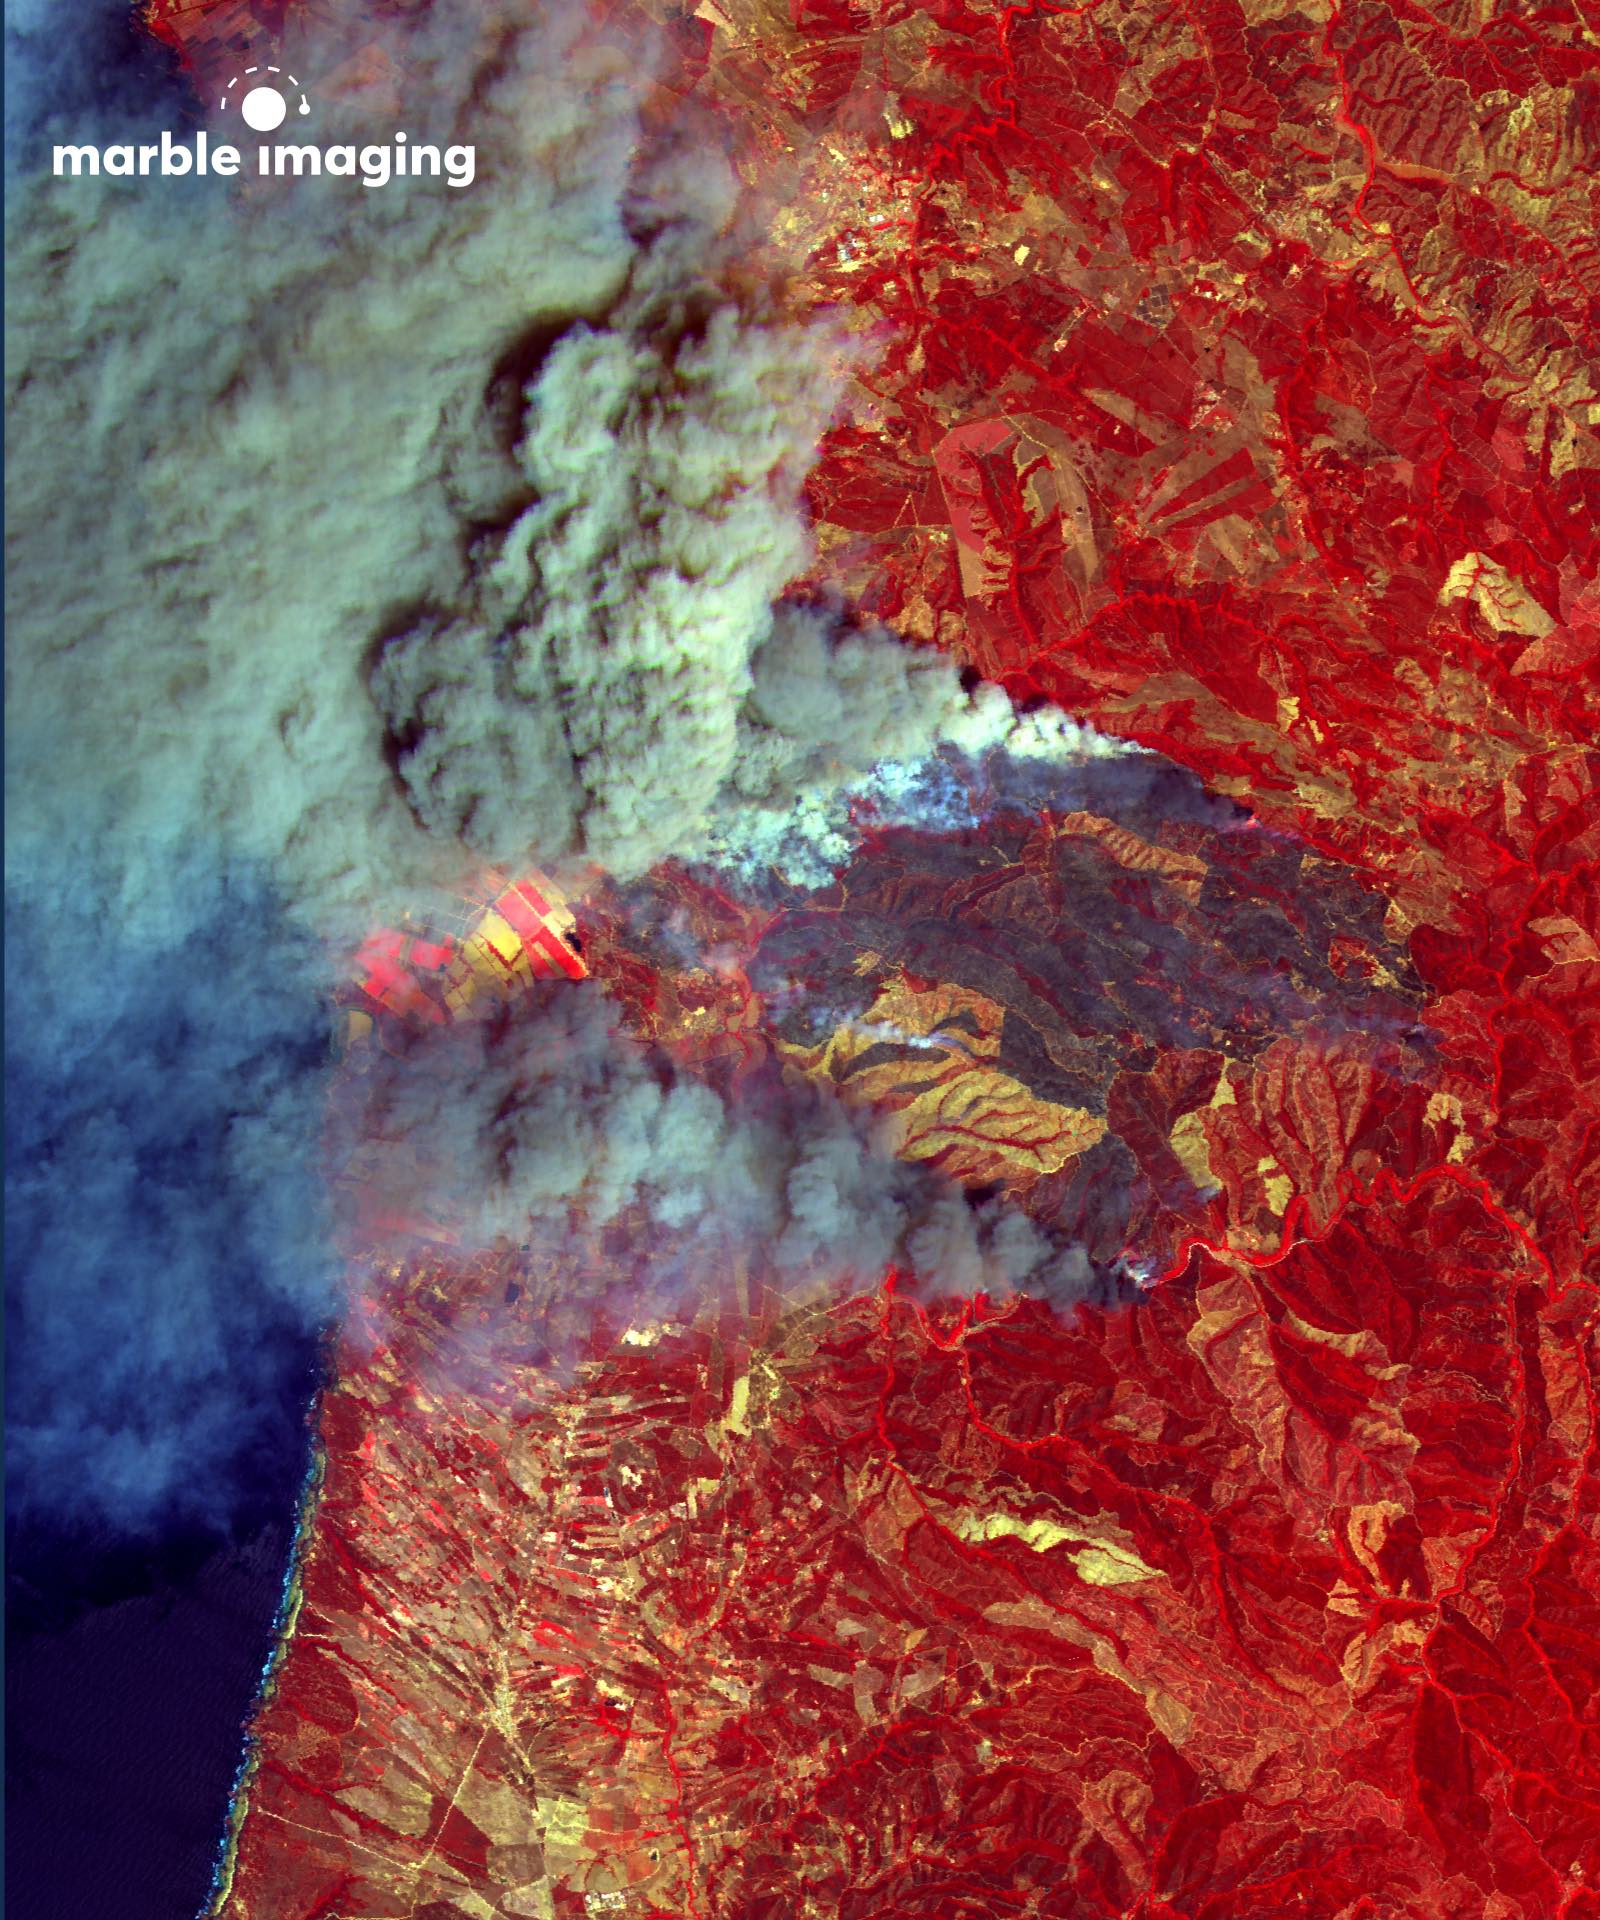 Wild Fires in Portugal